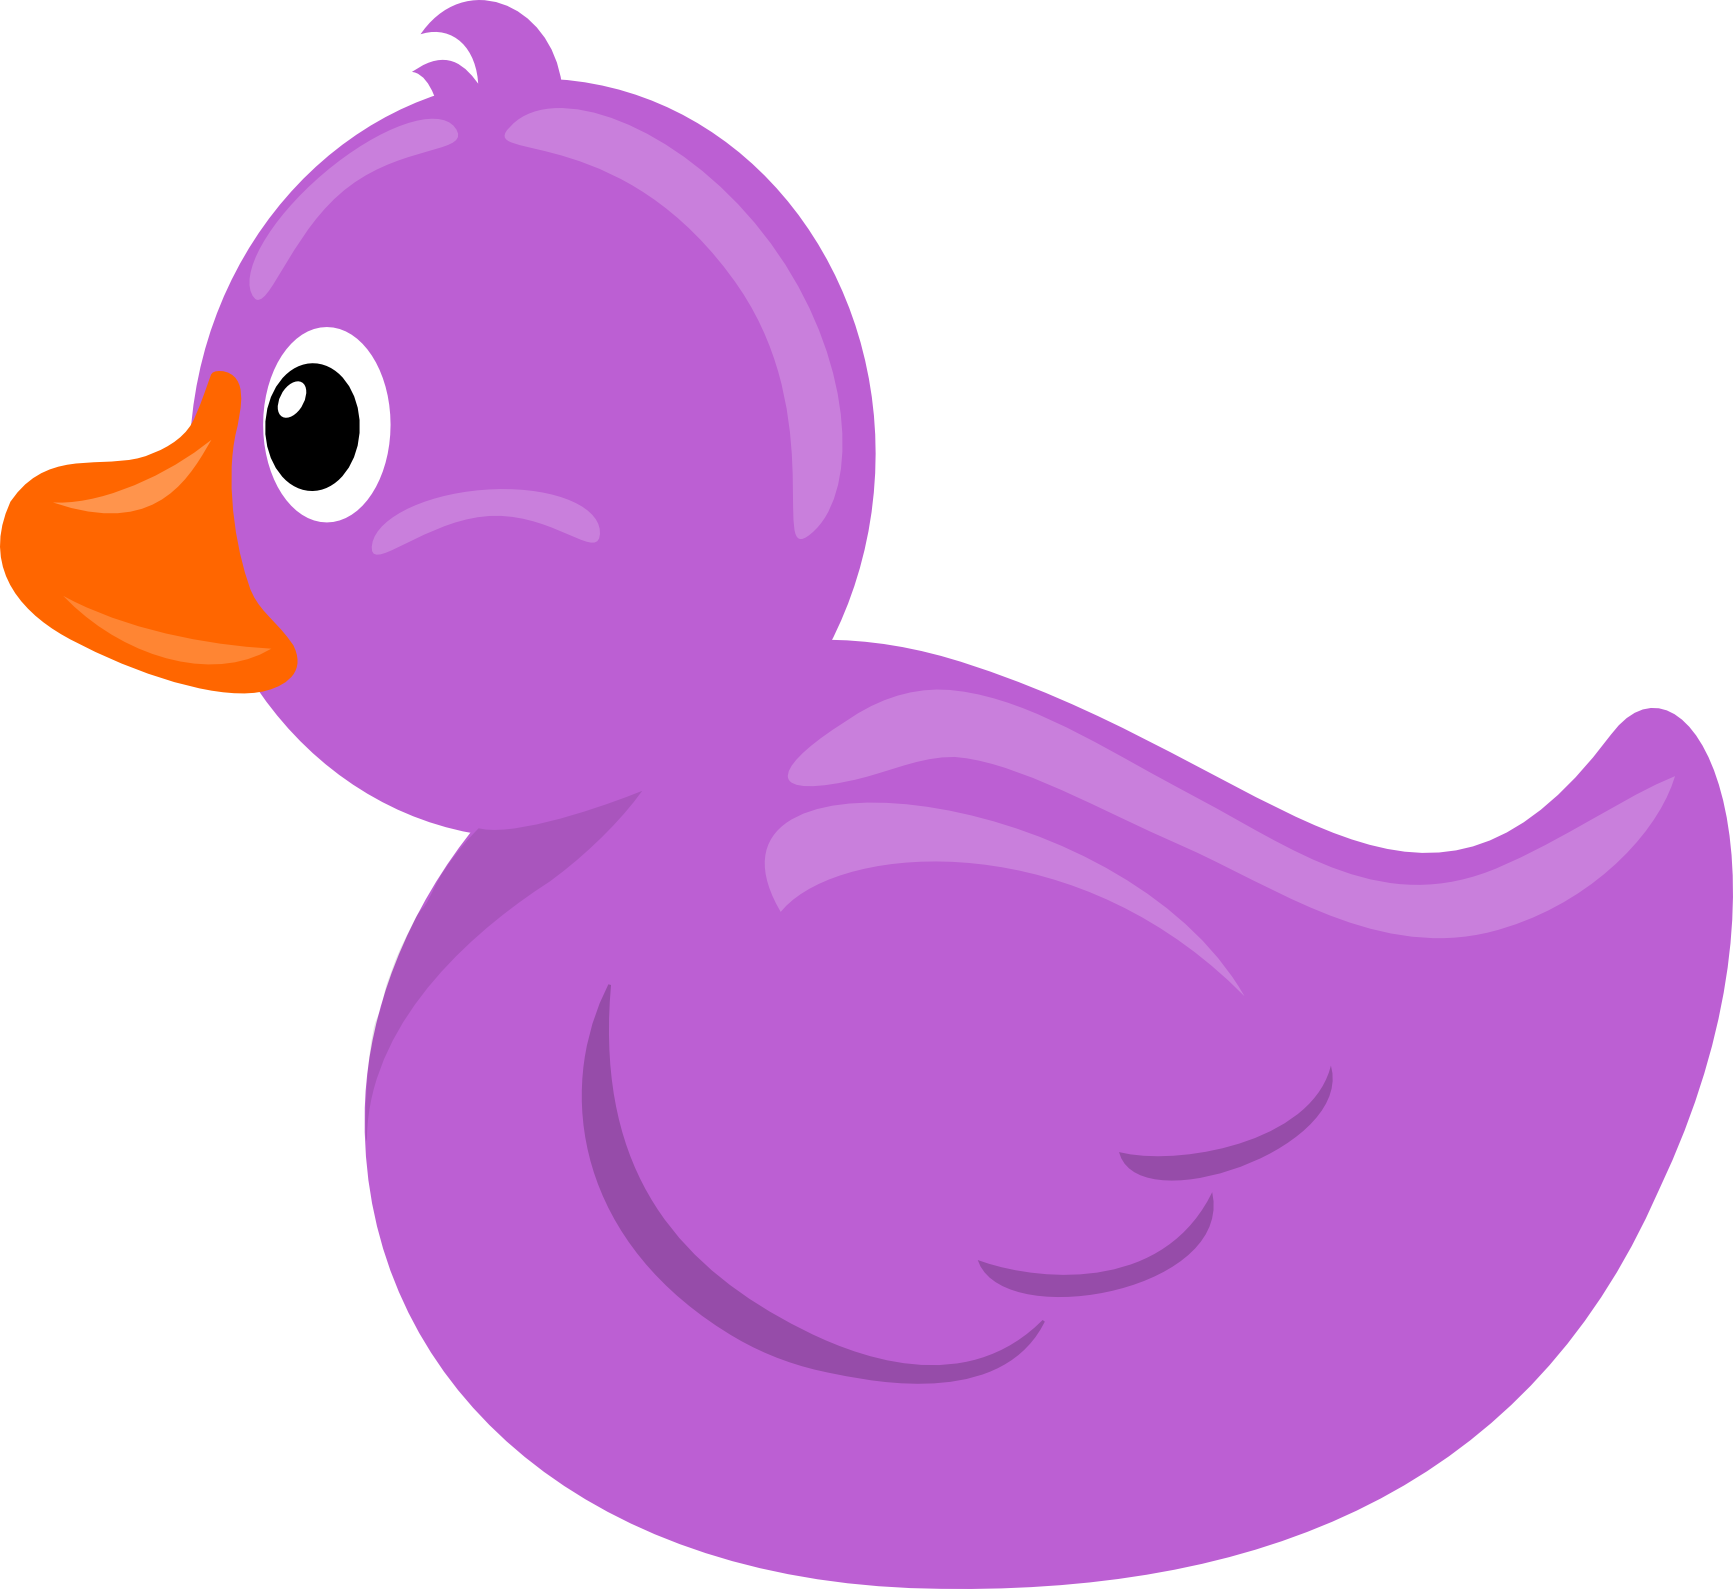 Rubber Duck Download PNG Image